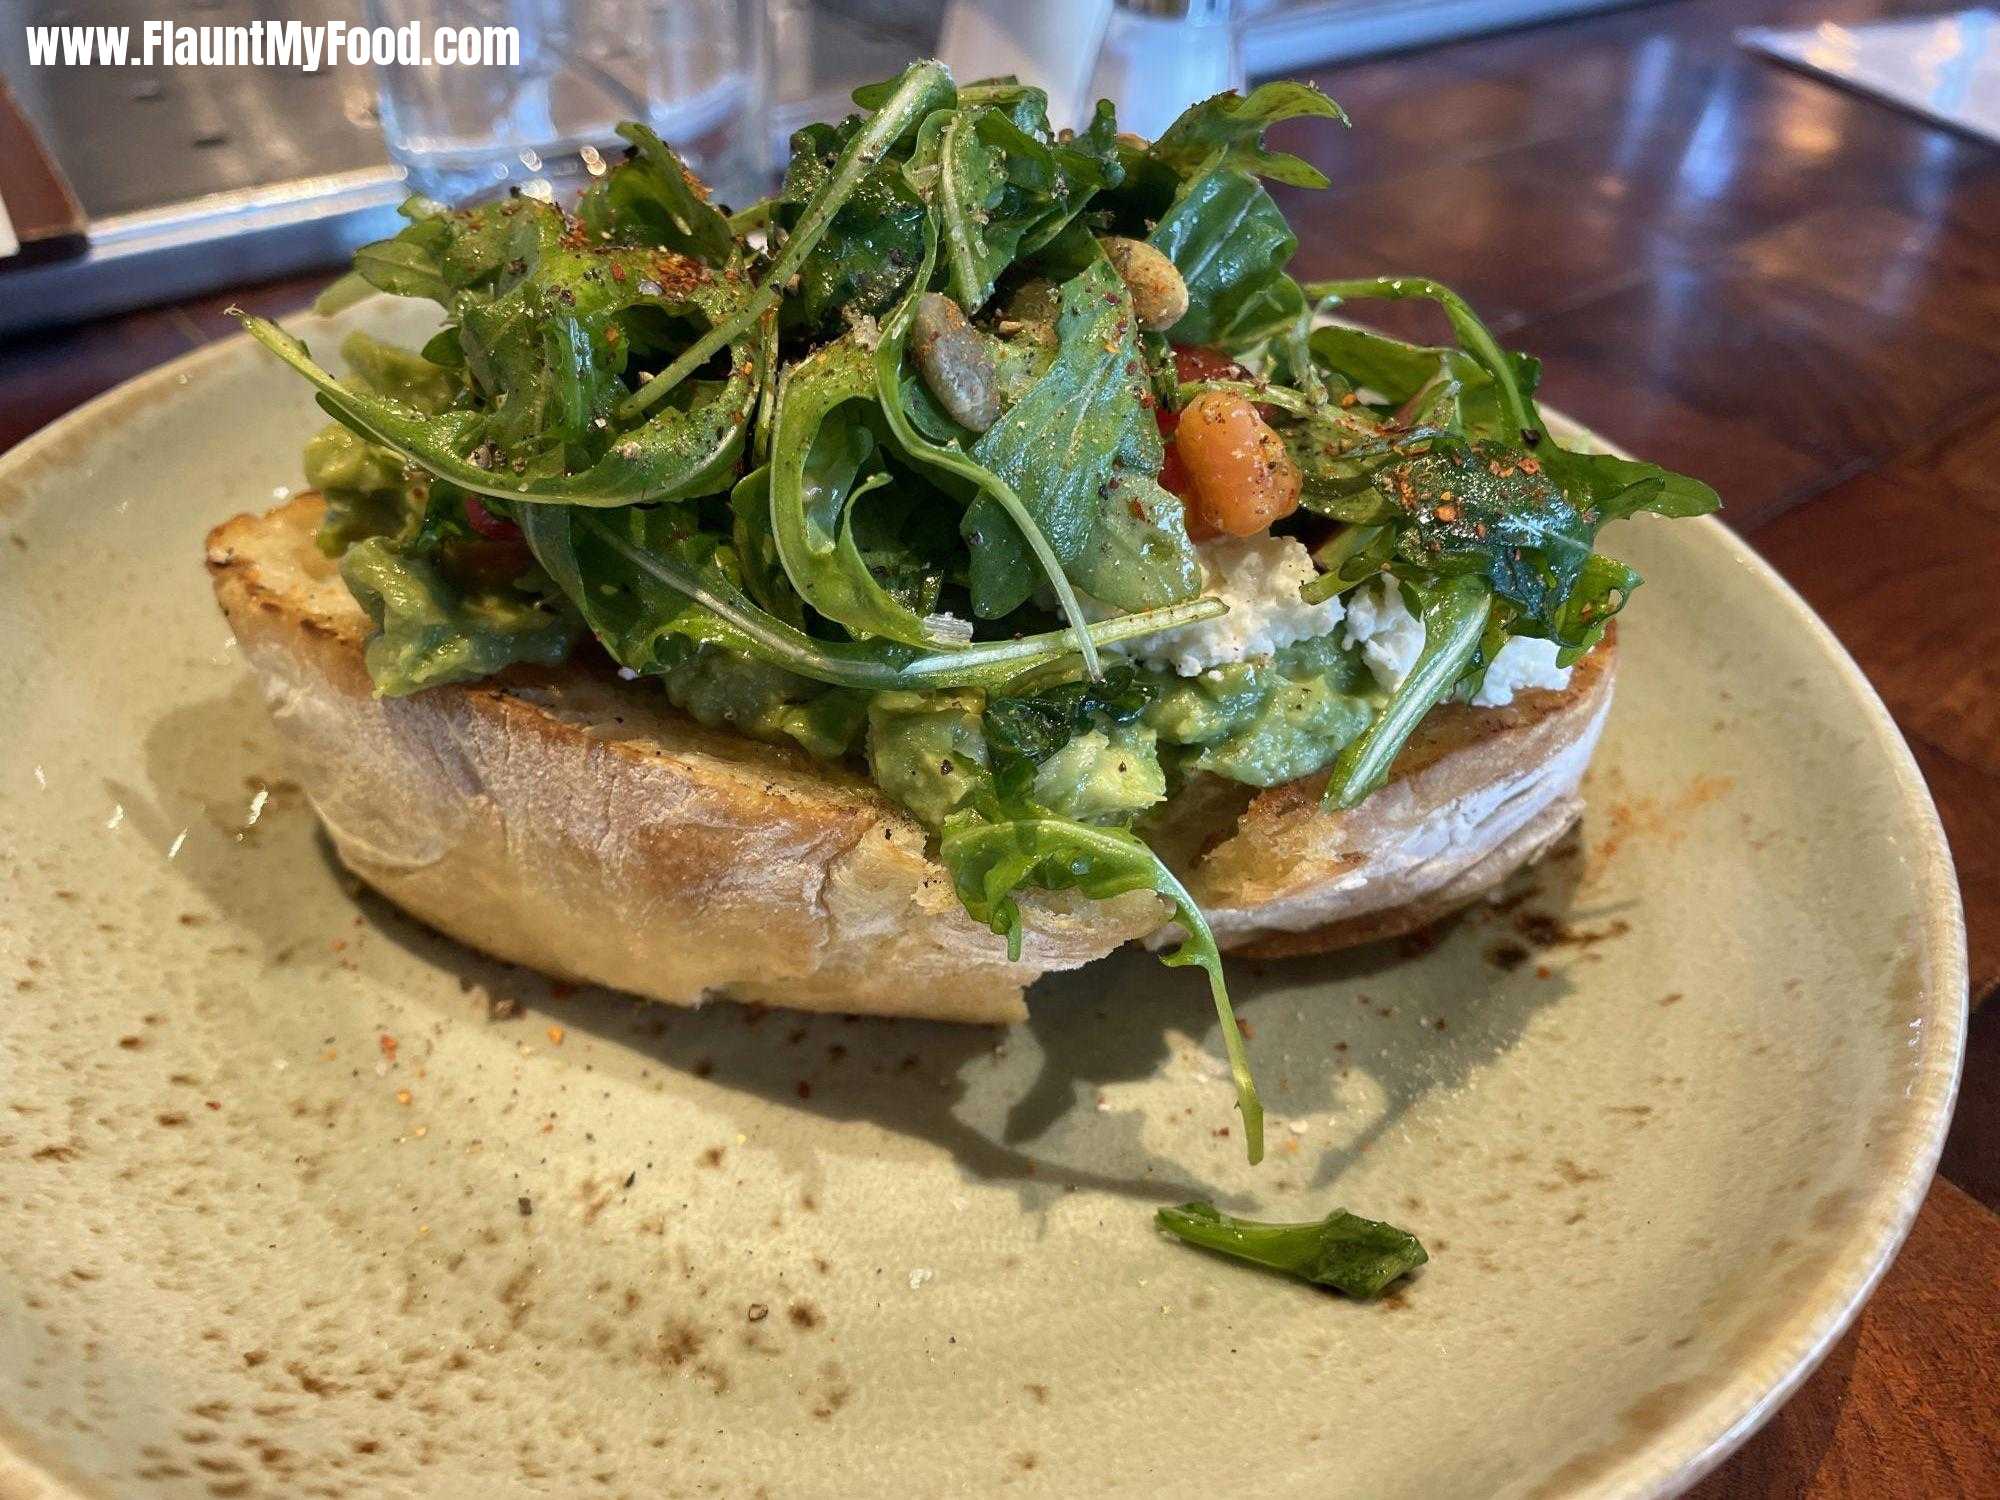 Avocado Toast for Lunch at Press CafeAvocado Toast for Lunch at Press Cafe Along the Trinity River in Clearfork Fort Worth Texas. Press Cafe is a great spot that has fire pits in the winter and shade umbrellas in the summer. There is also outdoor and indoor seating on both the first and second stories.